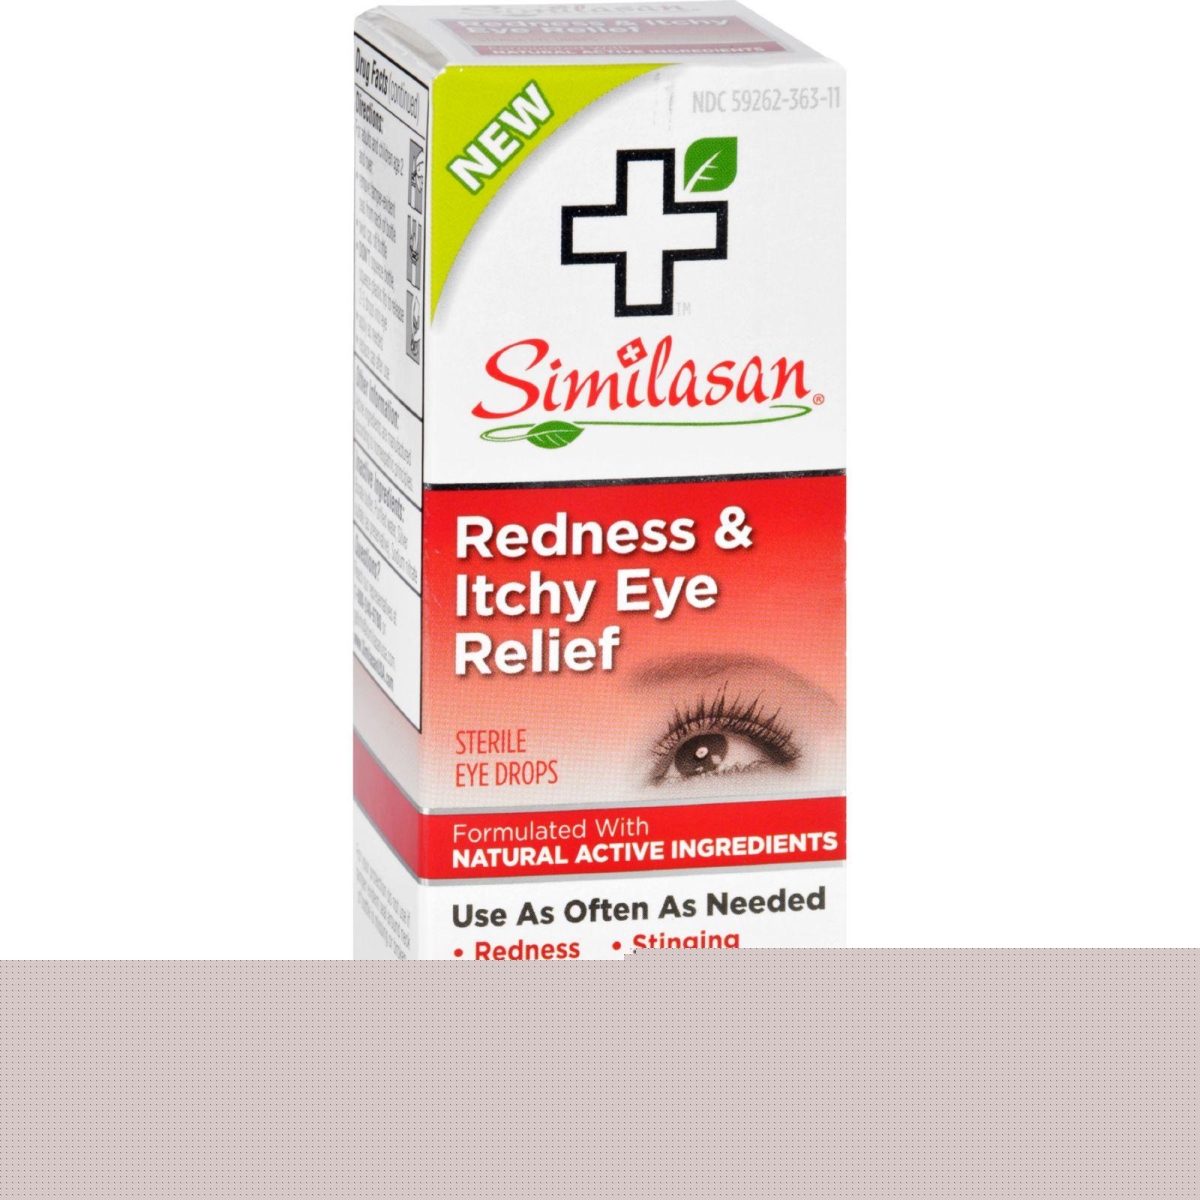 Hg1636968 0.33 Oz Redness & Itchy Eye Relief